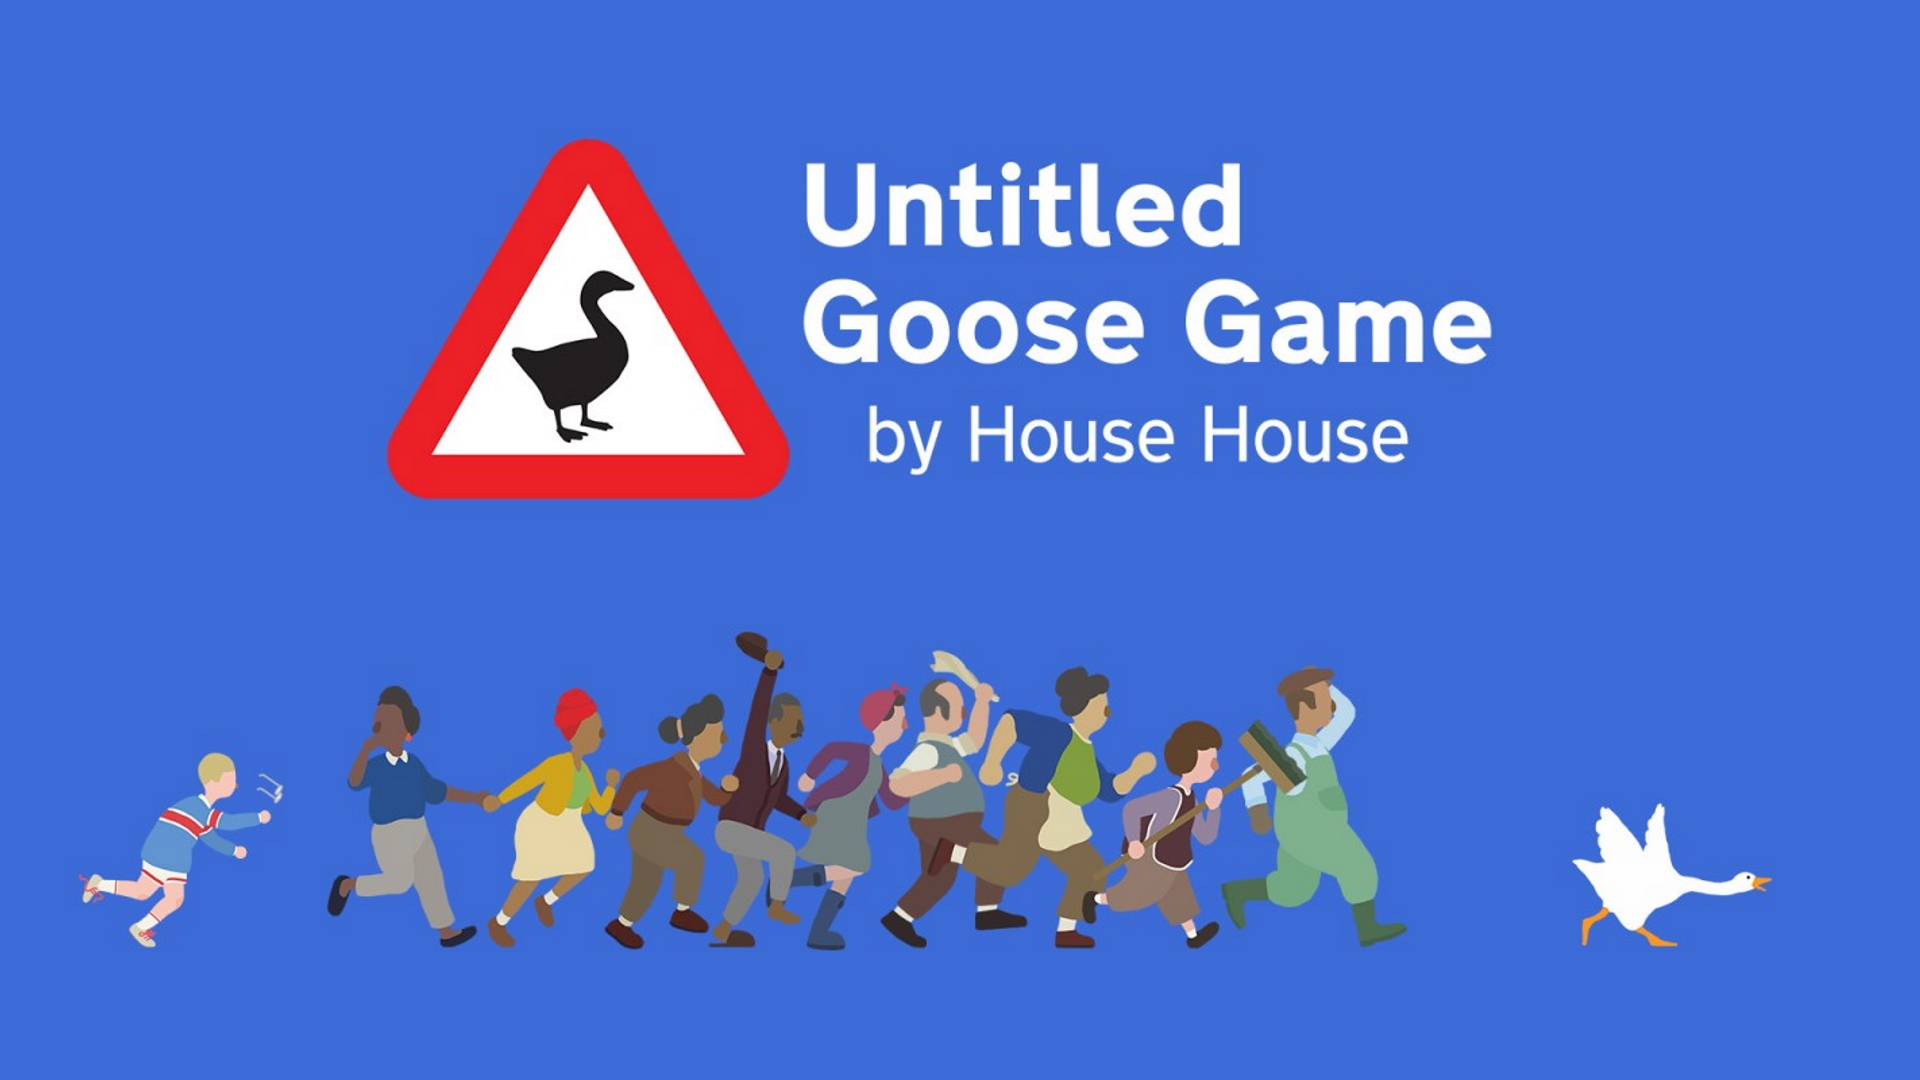 untitled goose game xbox one